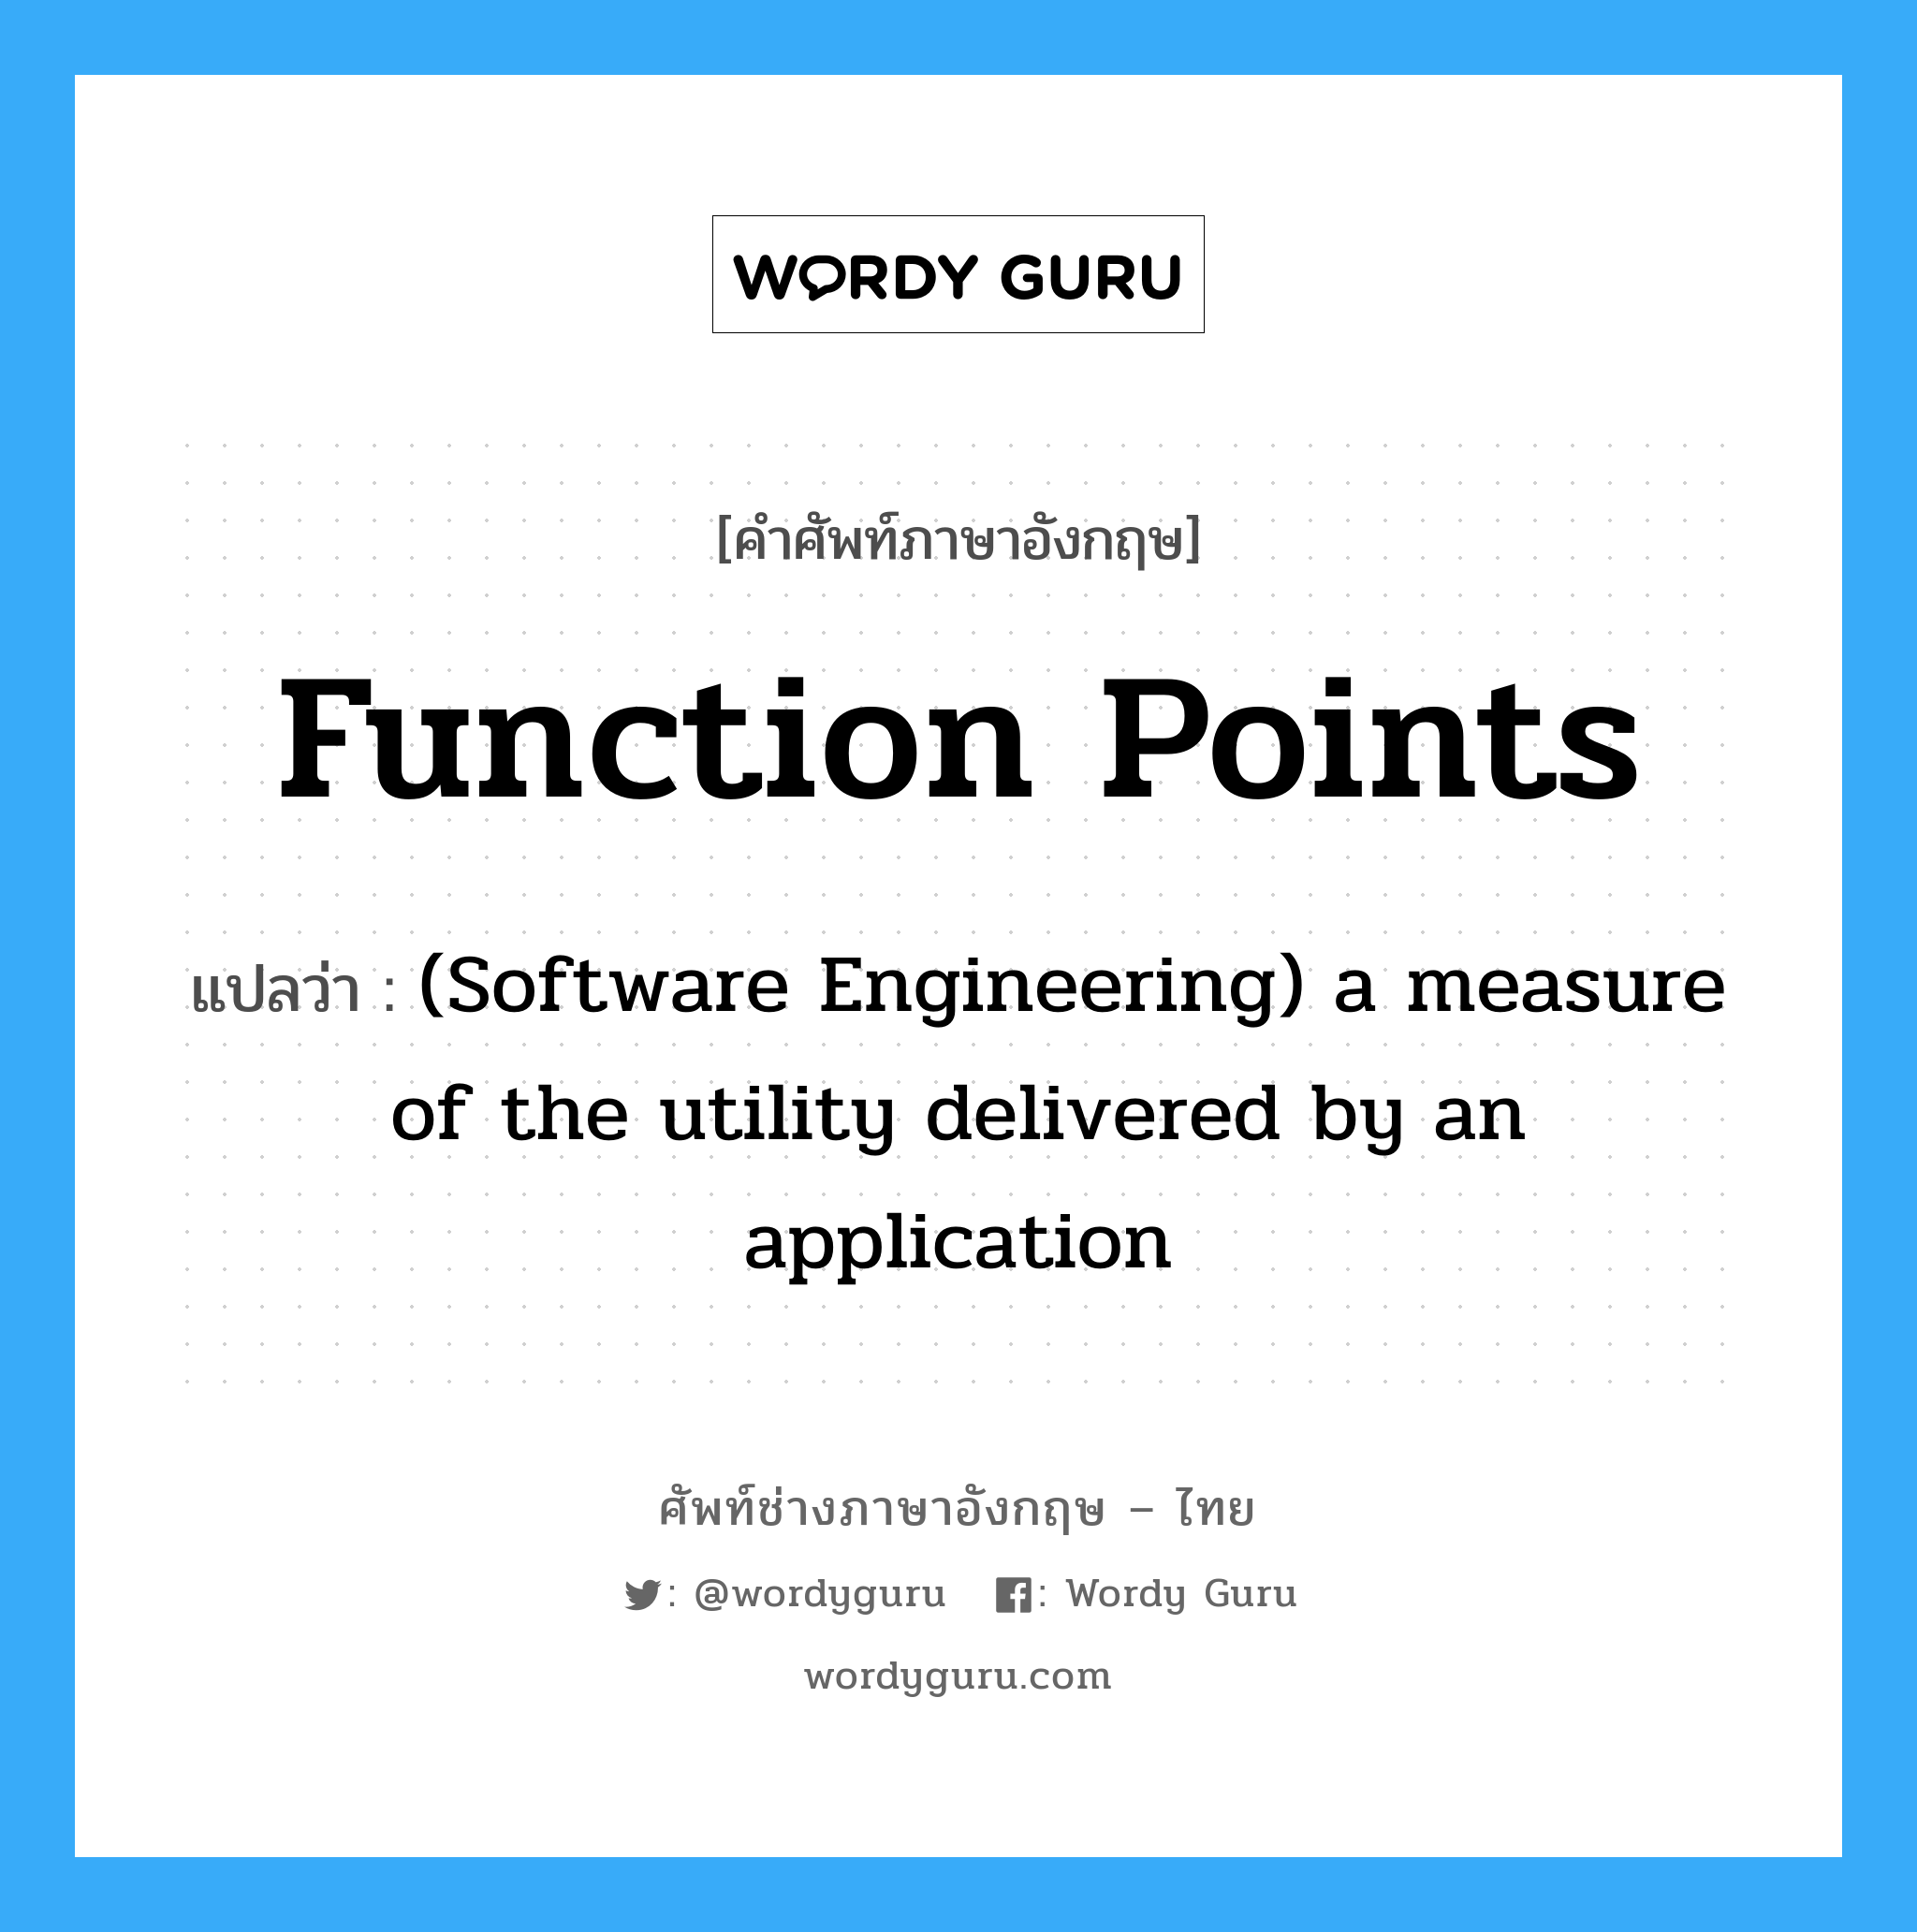 (Software Engineering) a measure of the utility delivered by an application ภาษาอังกฤษ?, คำศัพท์ช่างภาษาอังกฤษ - ไทย (Software Engineering) a measure of the utility delivered by an application คำศัพท์ภาษาอังกฤษ (Software Engineering) a measure of the utility delivered by an application แปลว่า Function points